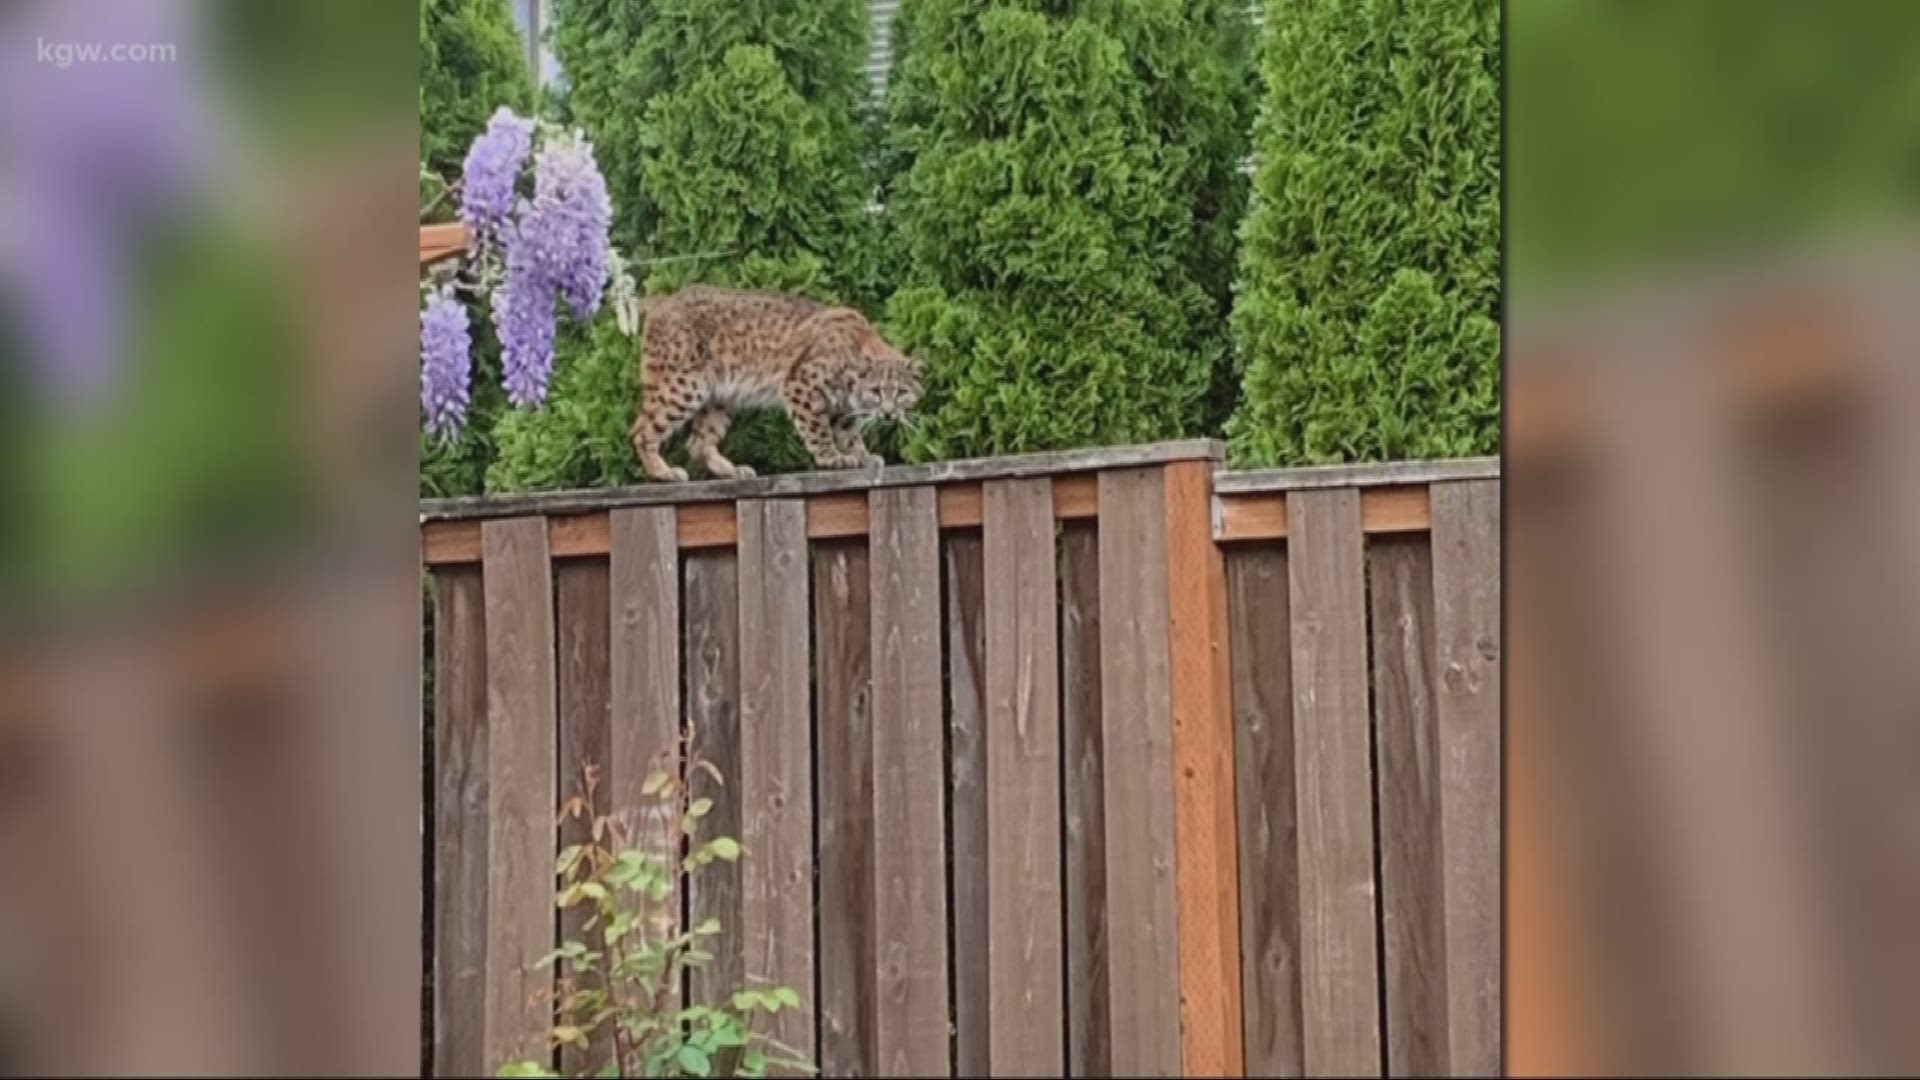 Wildlife experts say you may see some interesting animals in your yard these days, and those experts want to know about it.